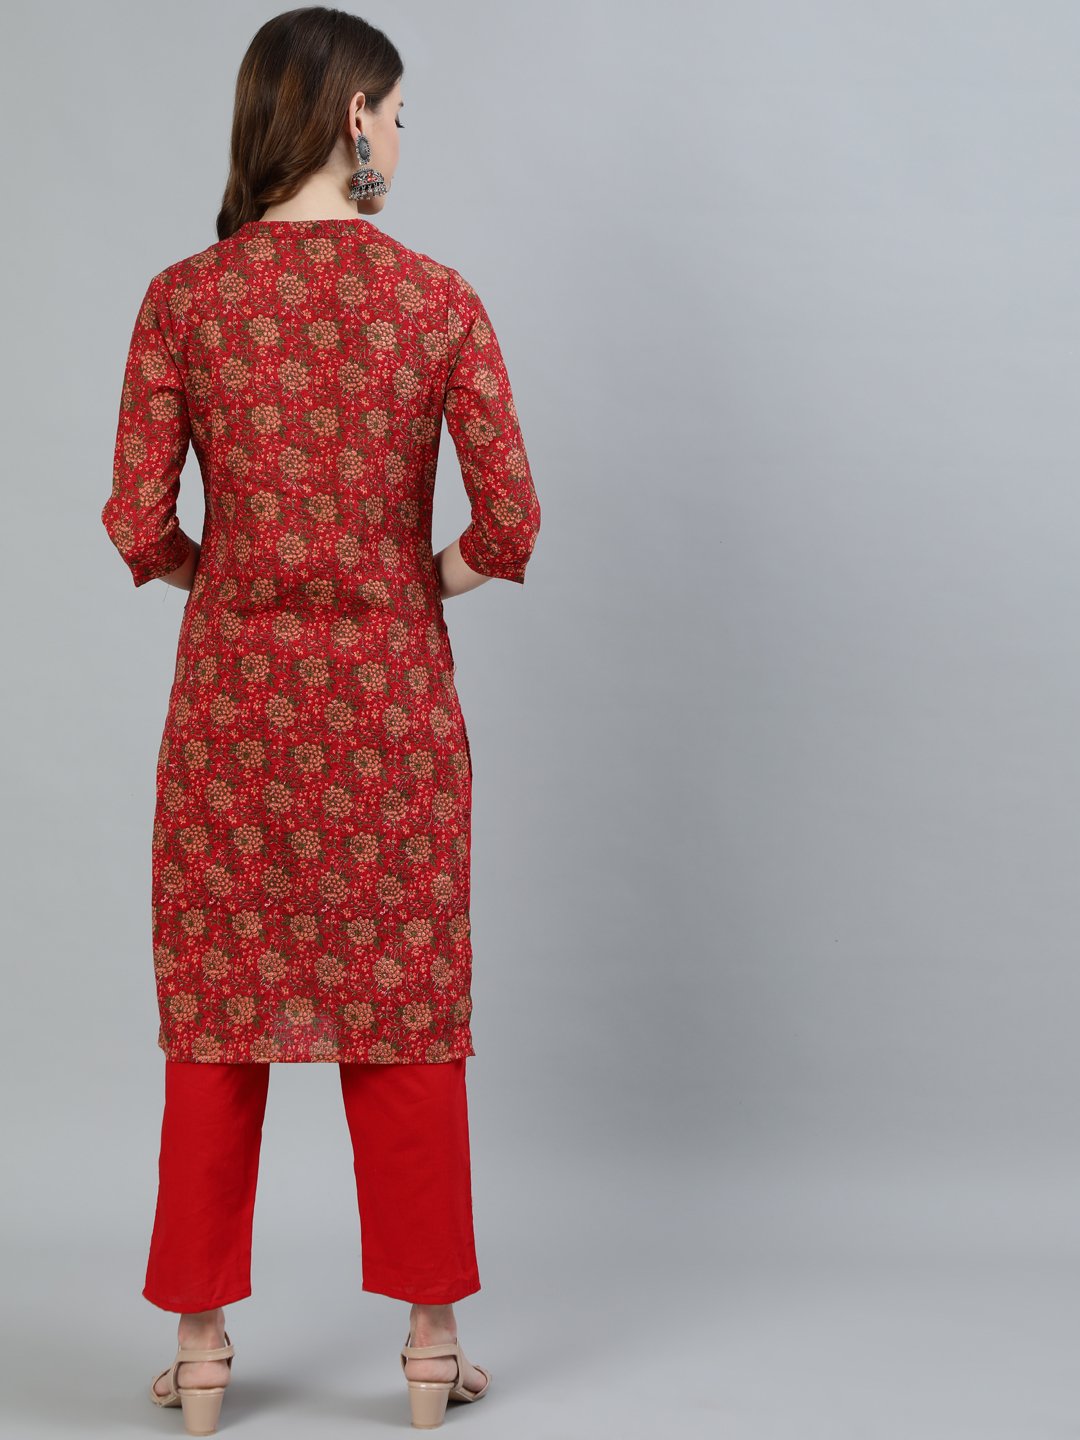 Ishin Women's Red Floral Printed Straight Kurta With Trouser